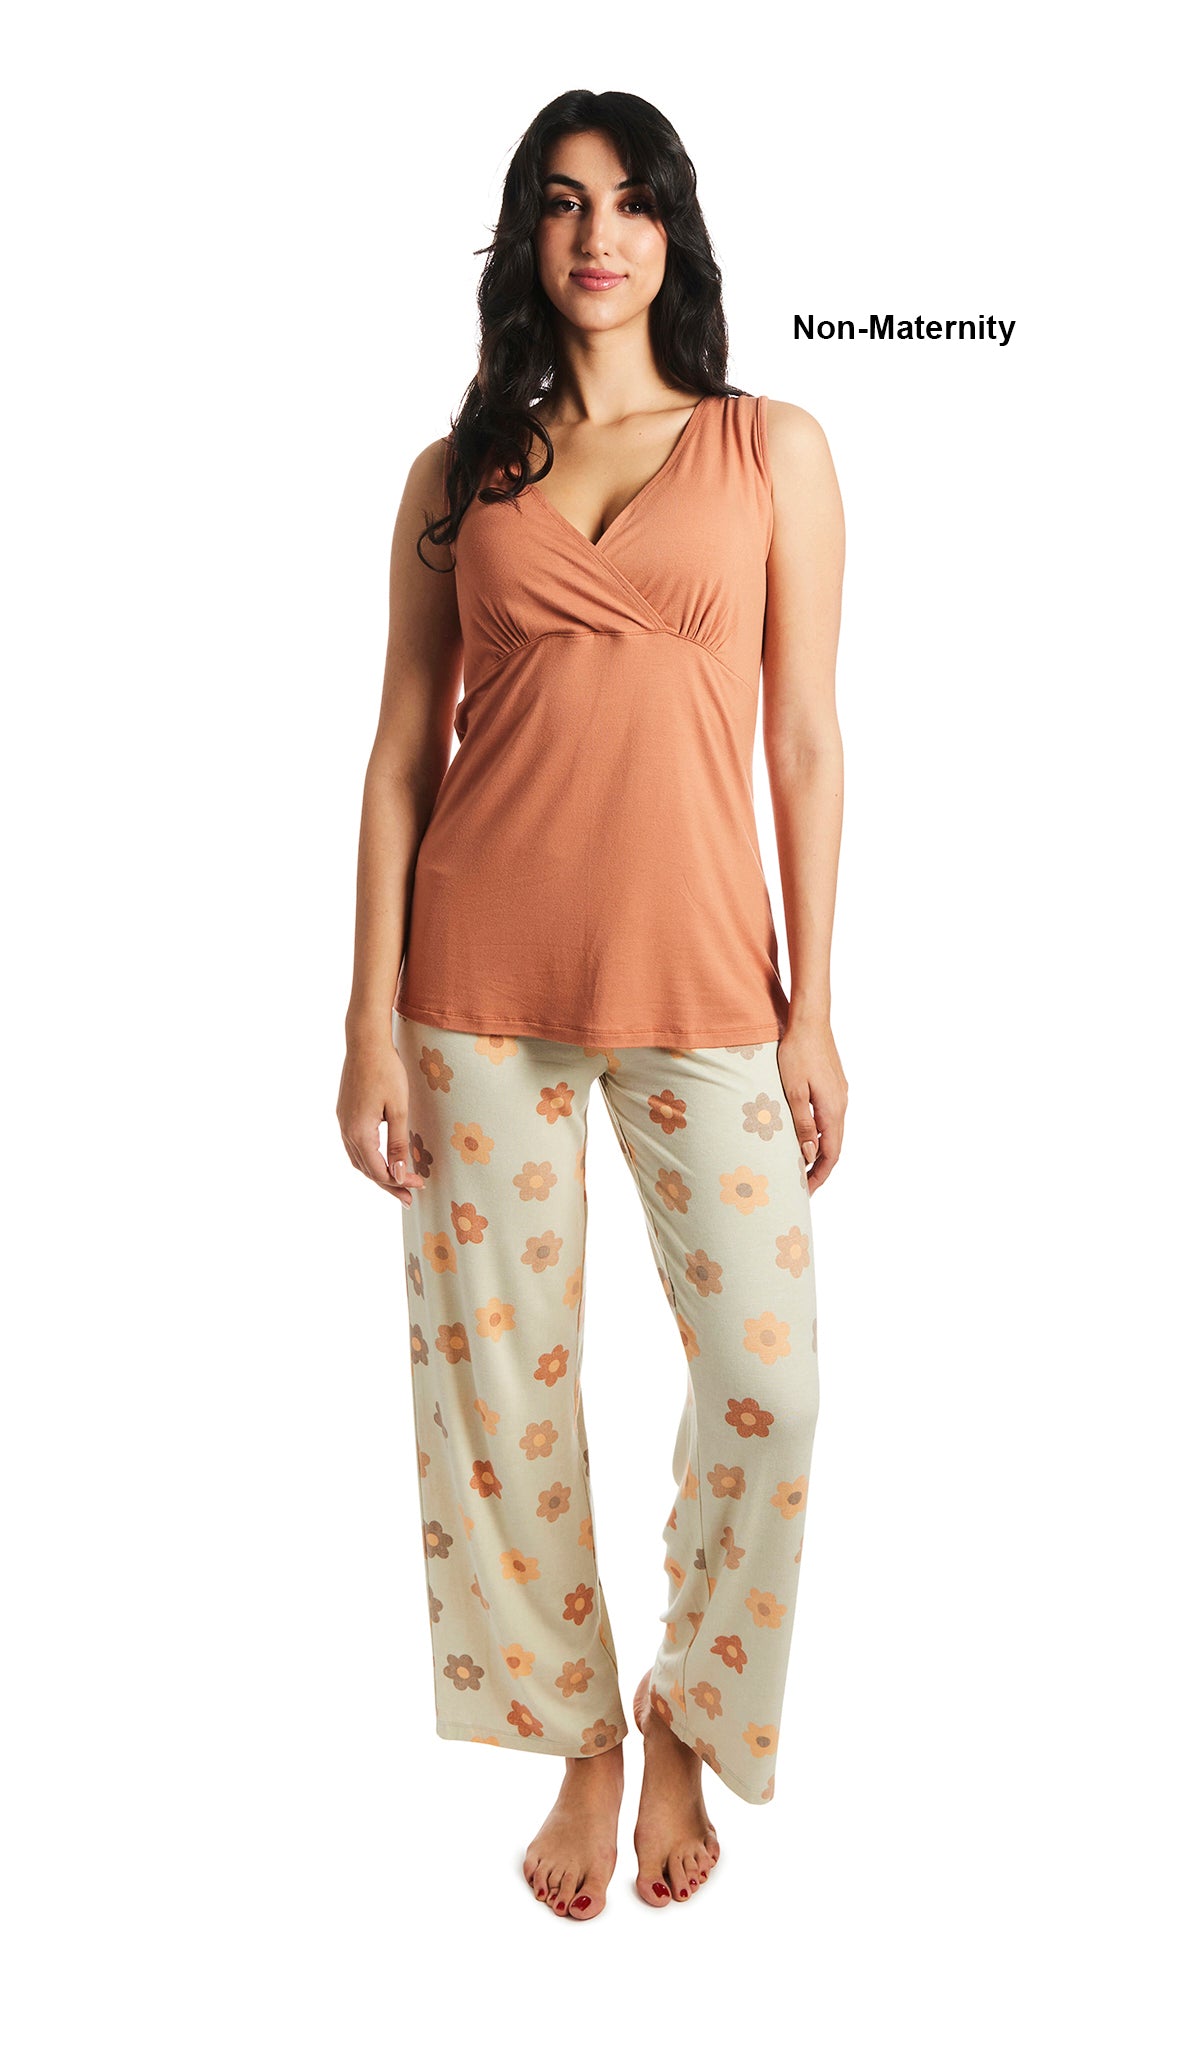 Daisies Analise 5-Piece Set, pregnant woman wearing criss-cross bust tank top and pant as non-maternity.